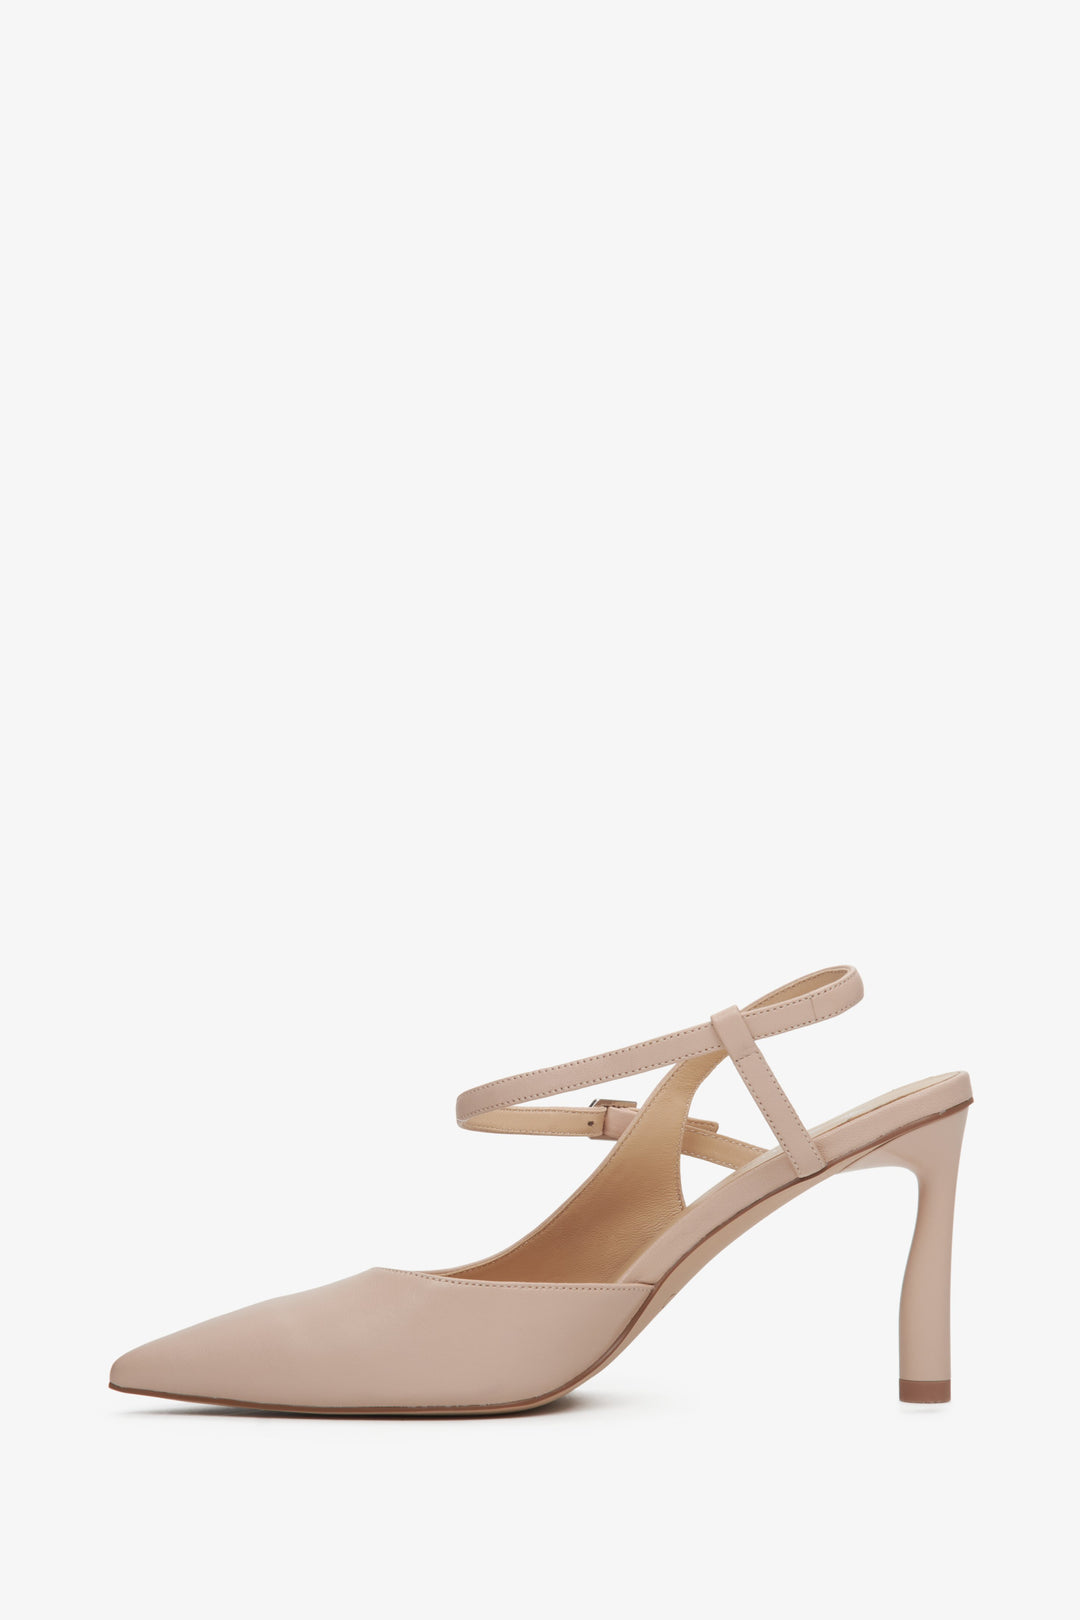 Estro slingback shoes with a pointed toe, made of beige, natural leather.